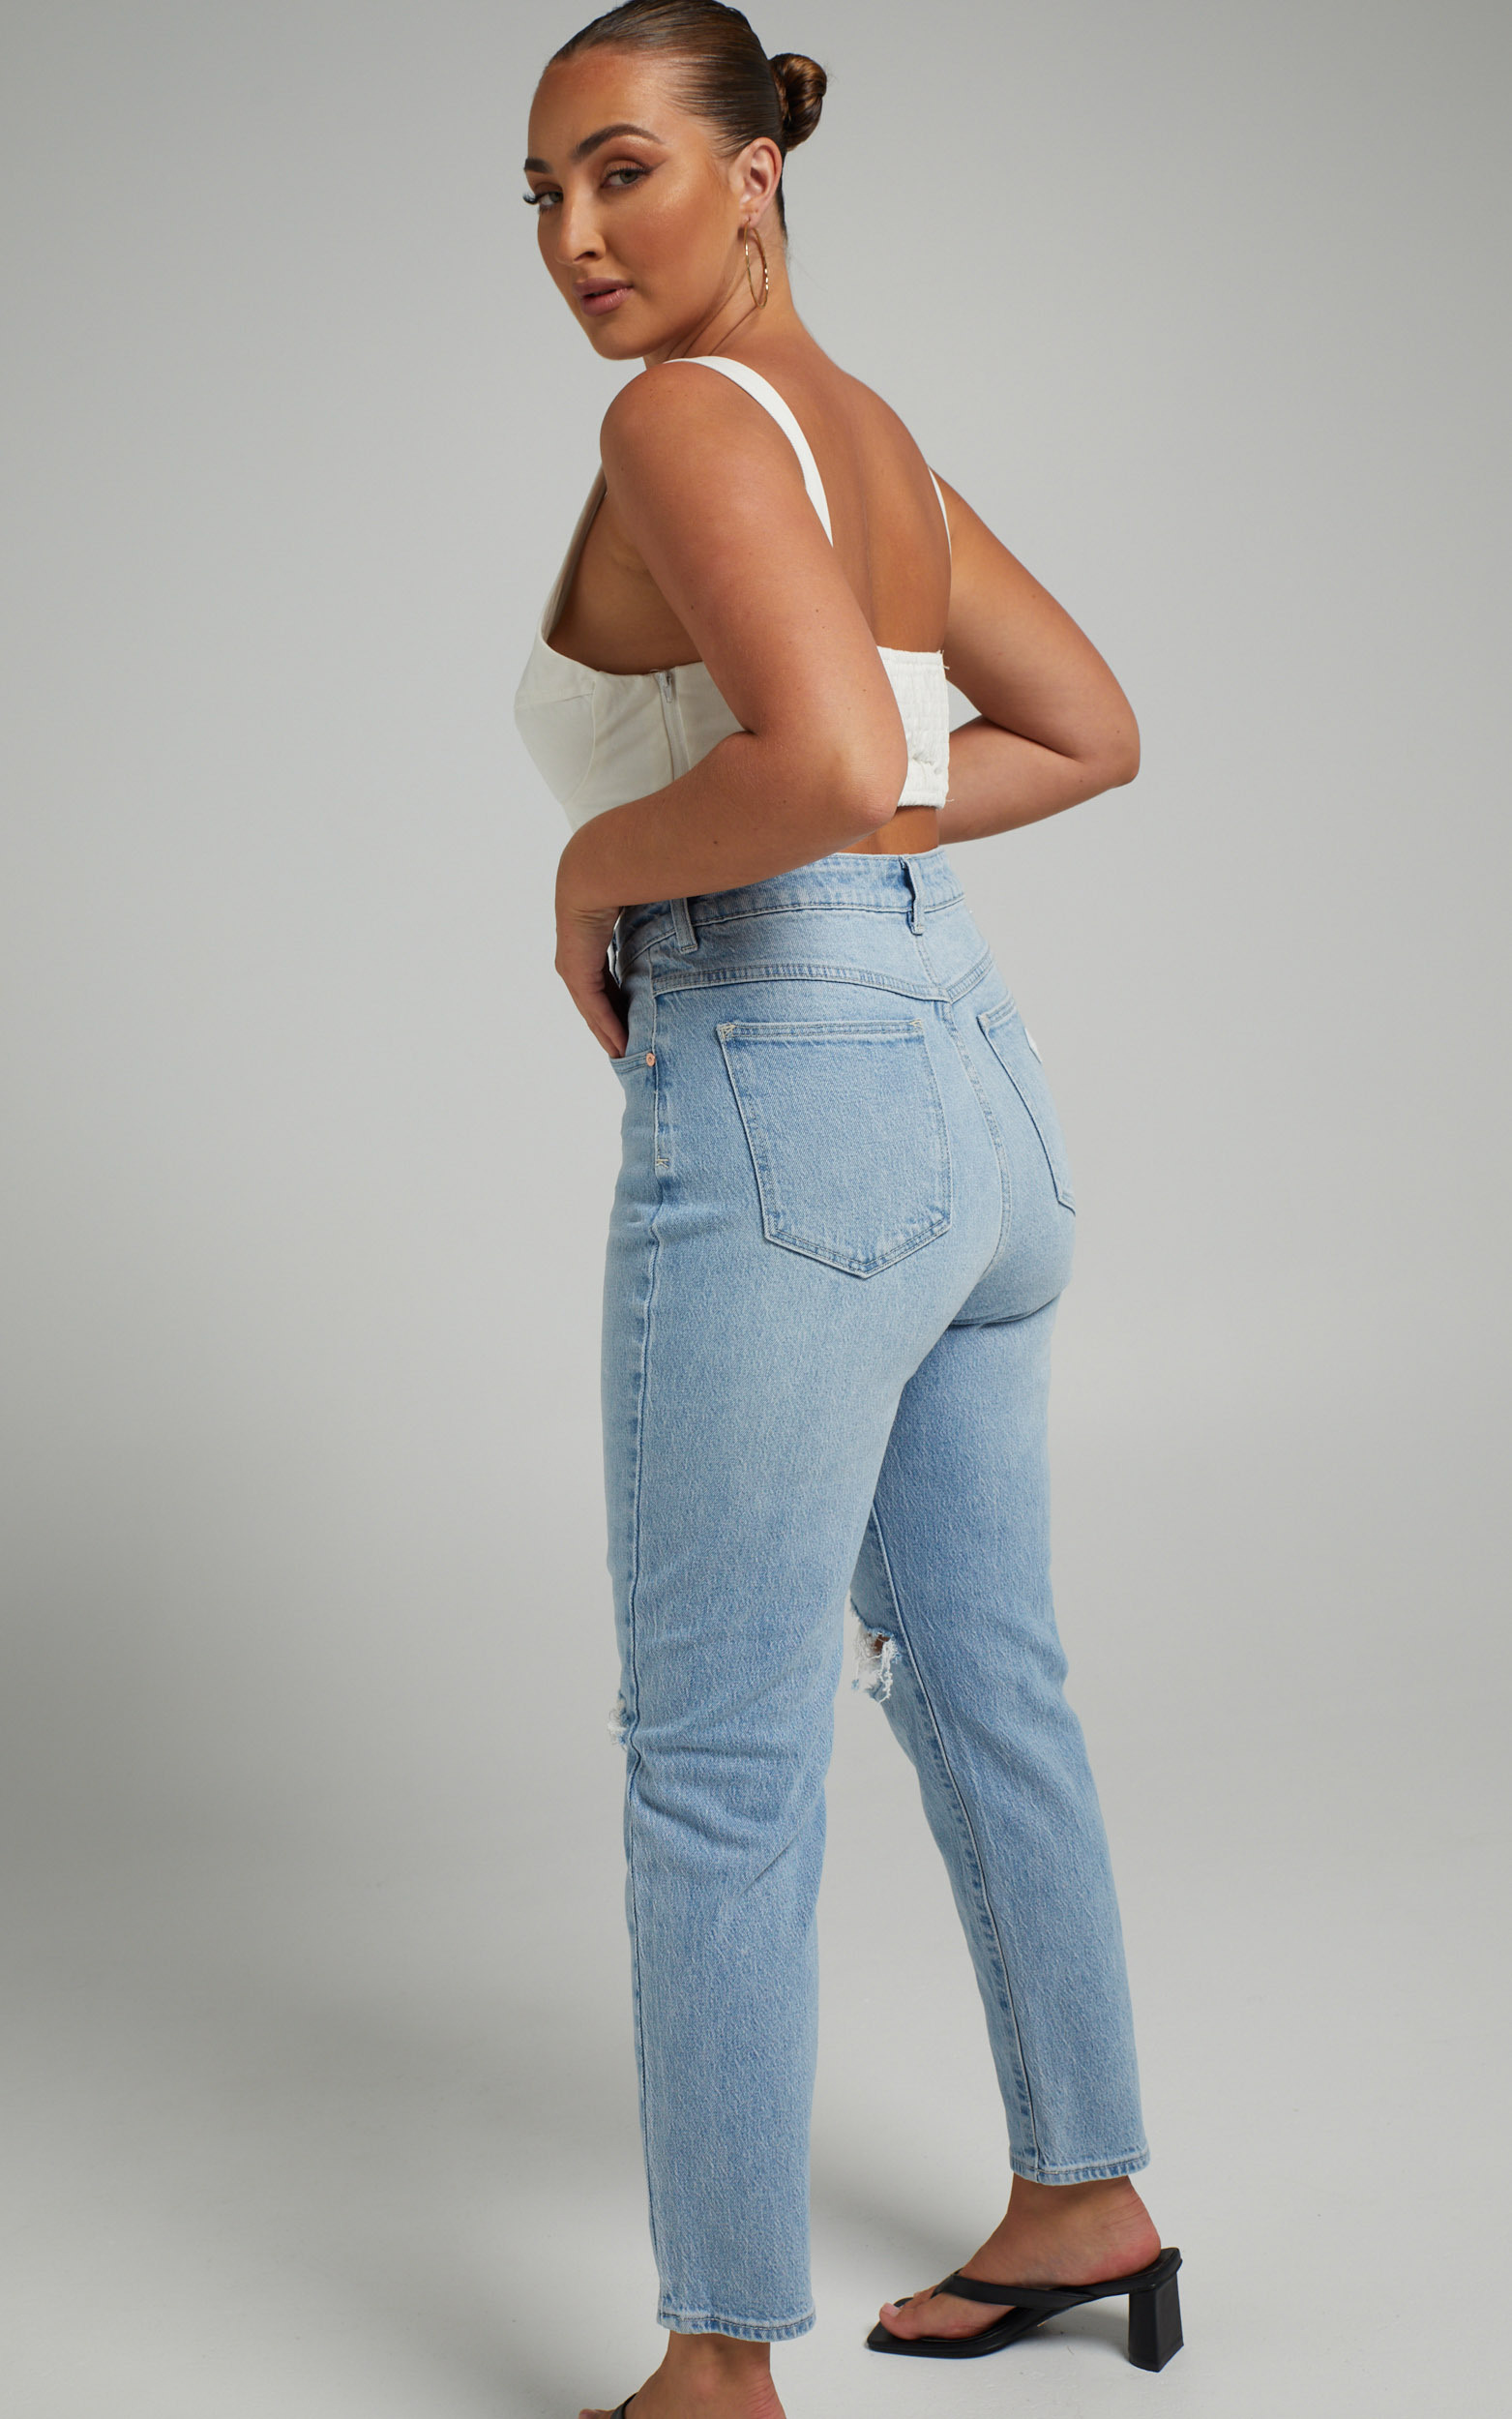 Abrand - A '94 High Slim Jean in Gina Rip - 06, BLU1, hi-res image number null